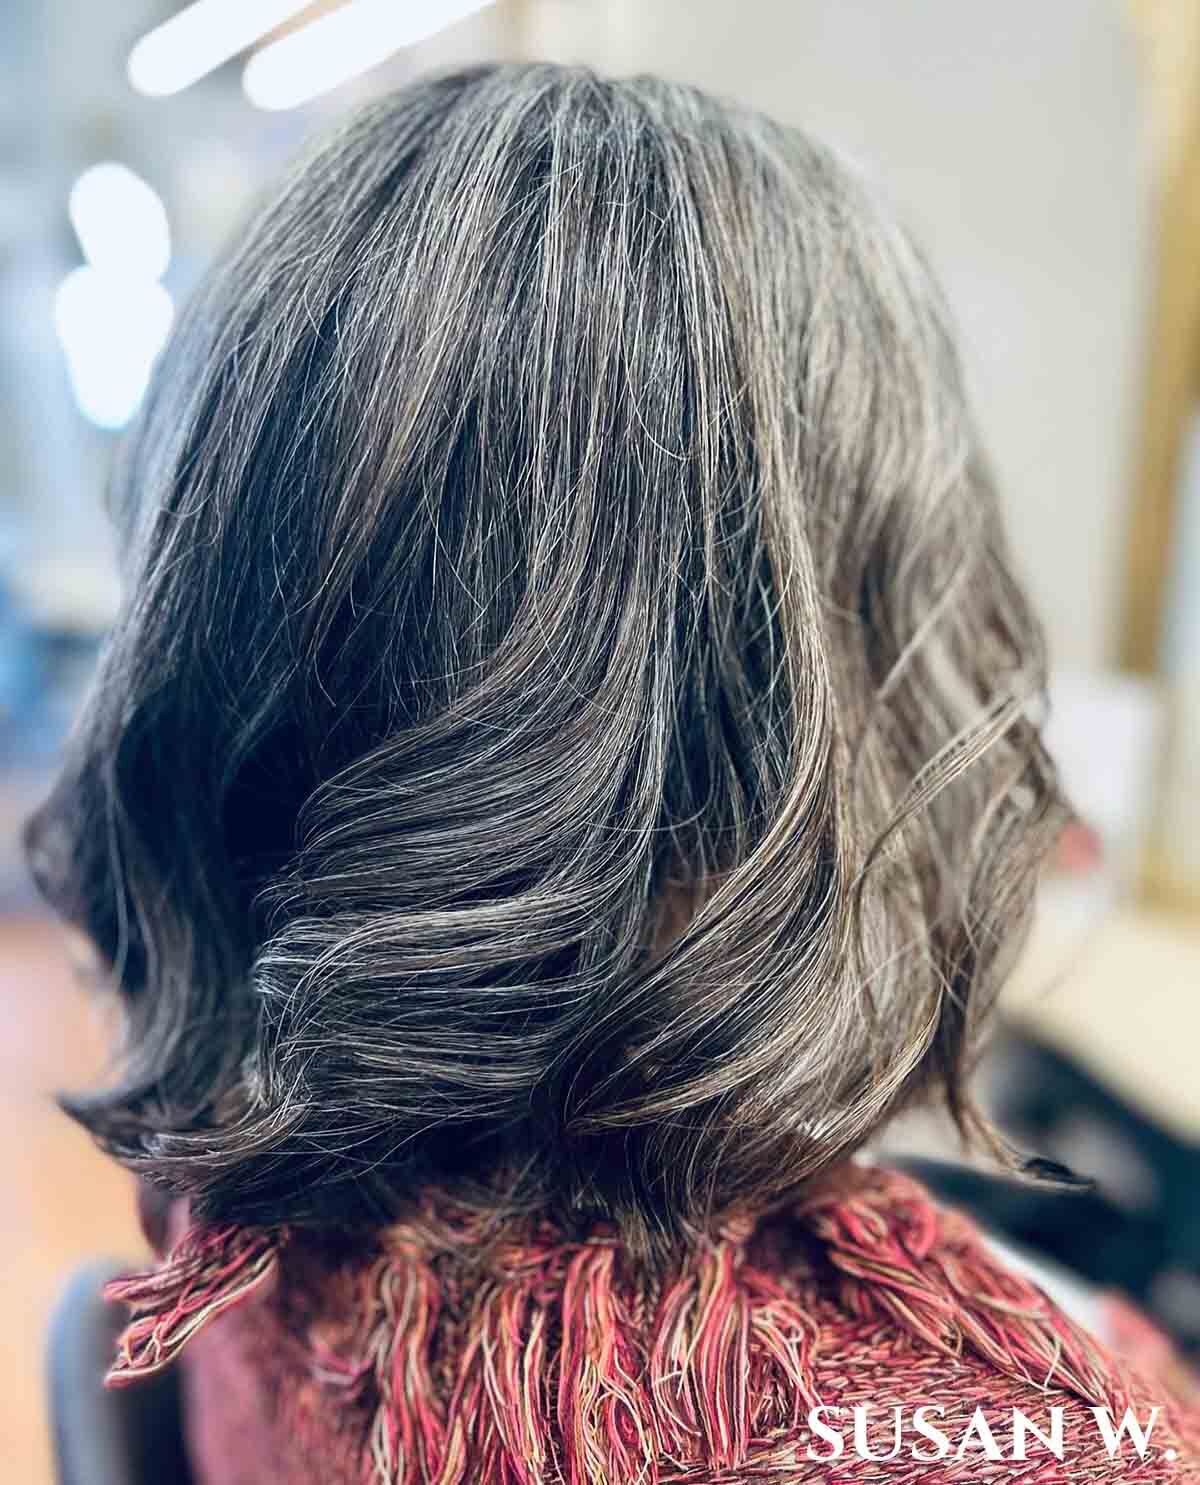 Woman facing away with above shoulder length curled dark silver hair.